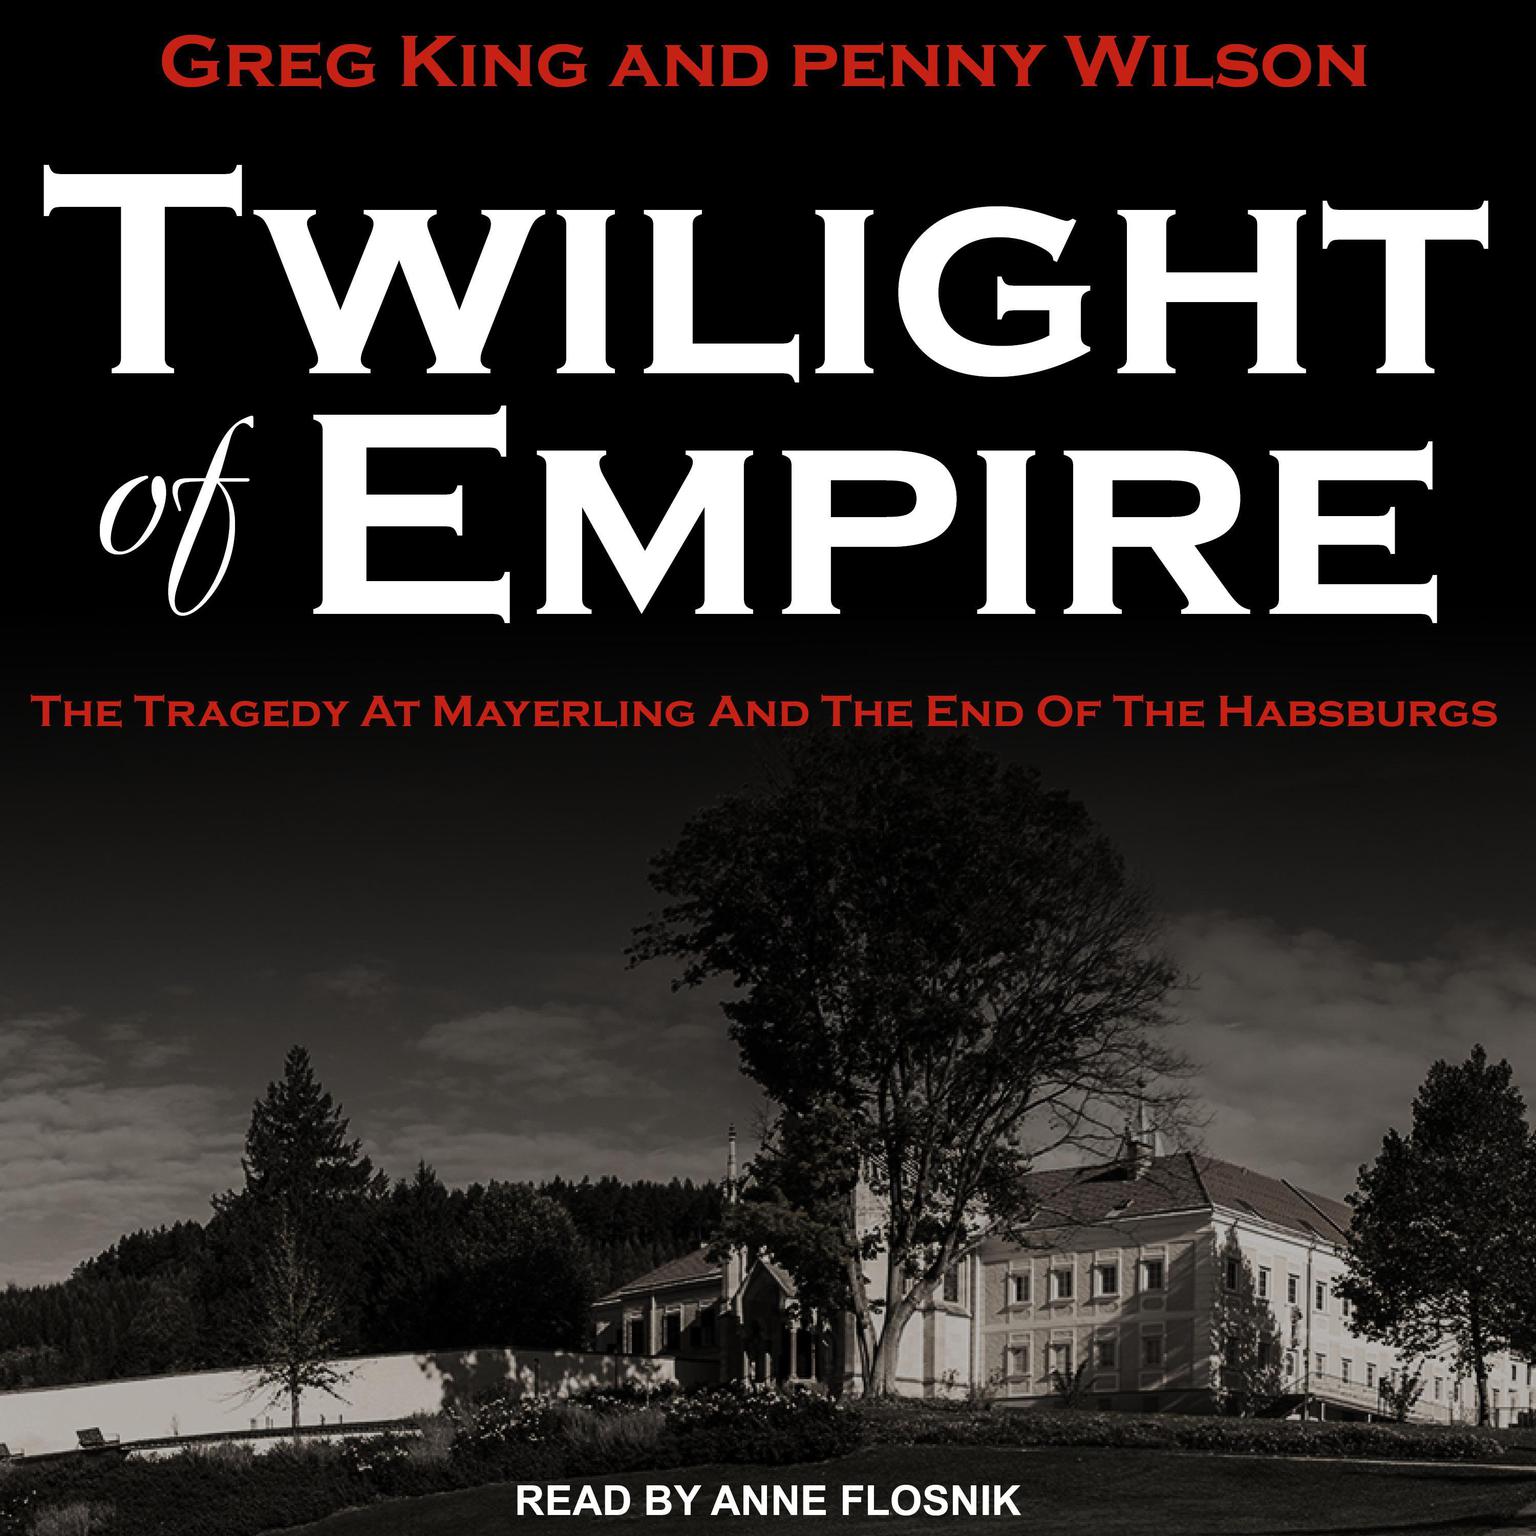 Twilight of Empire: The Tragedy at Mayerling and the End of the Habsburgs Audiobook, by Greg King